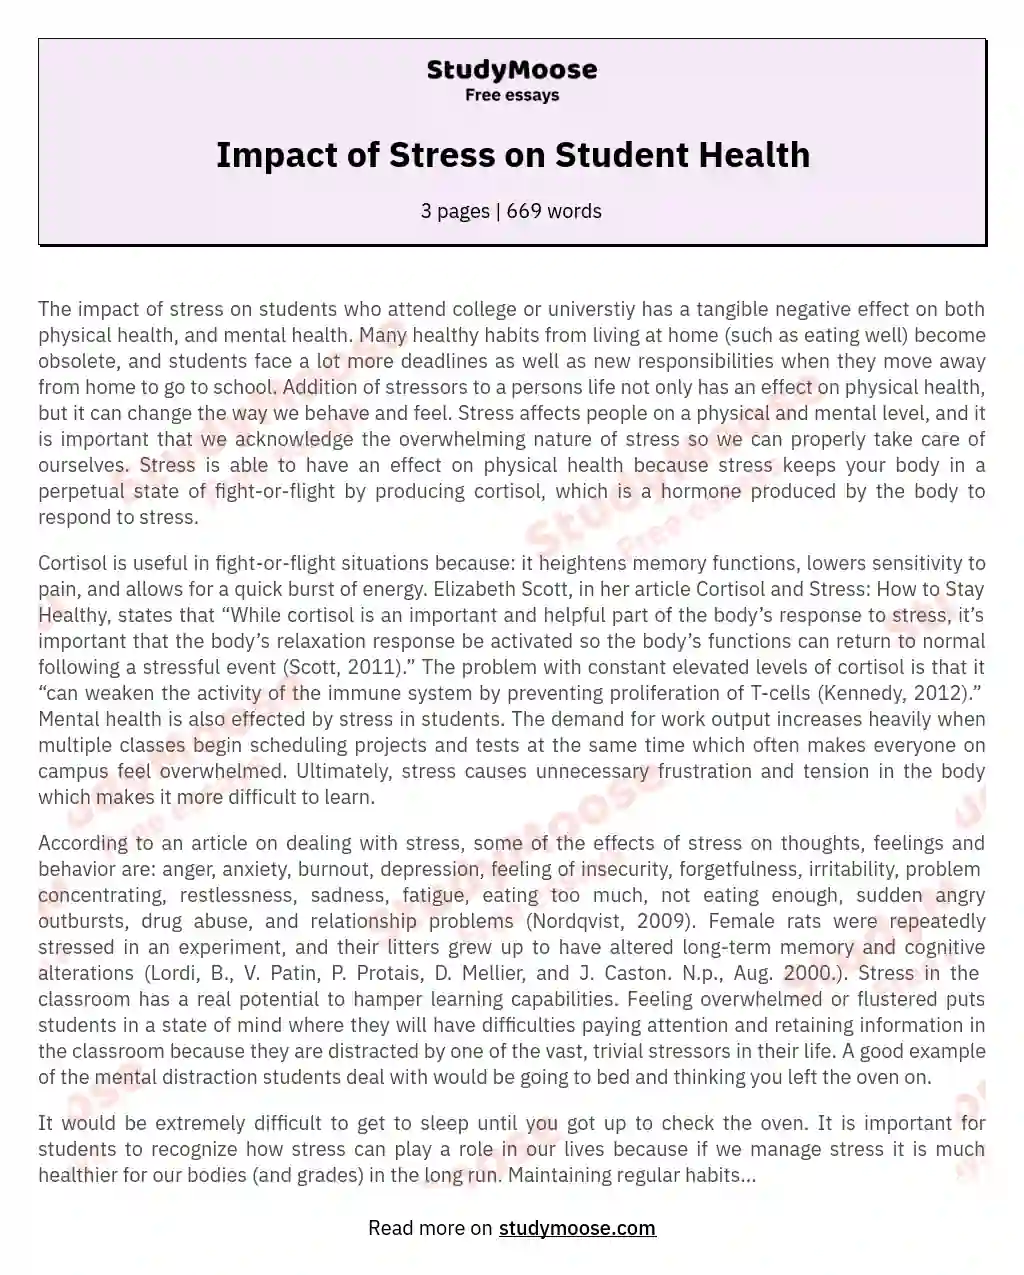 Impact of Stress on Student Health essay